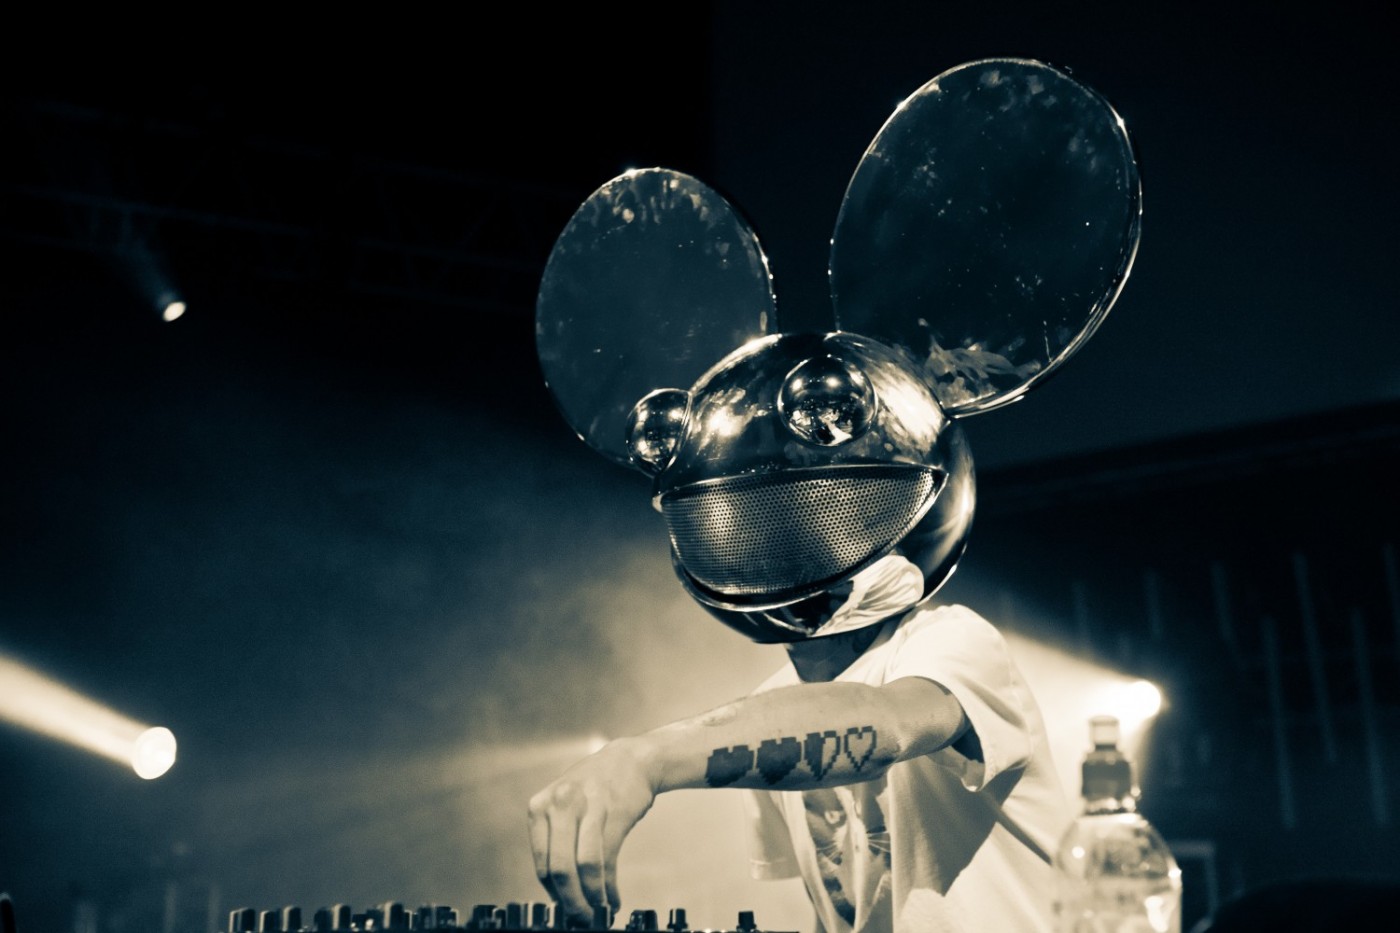 Deadmau5 Delivers His Two Hour Live Stream From Xs Nightclub